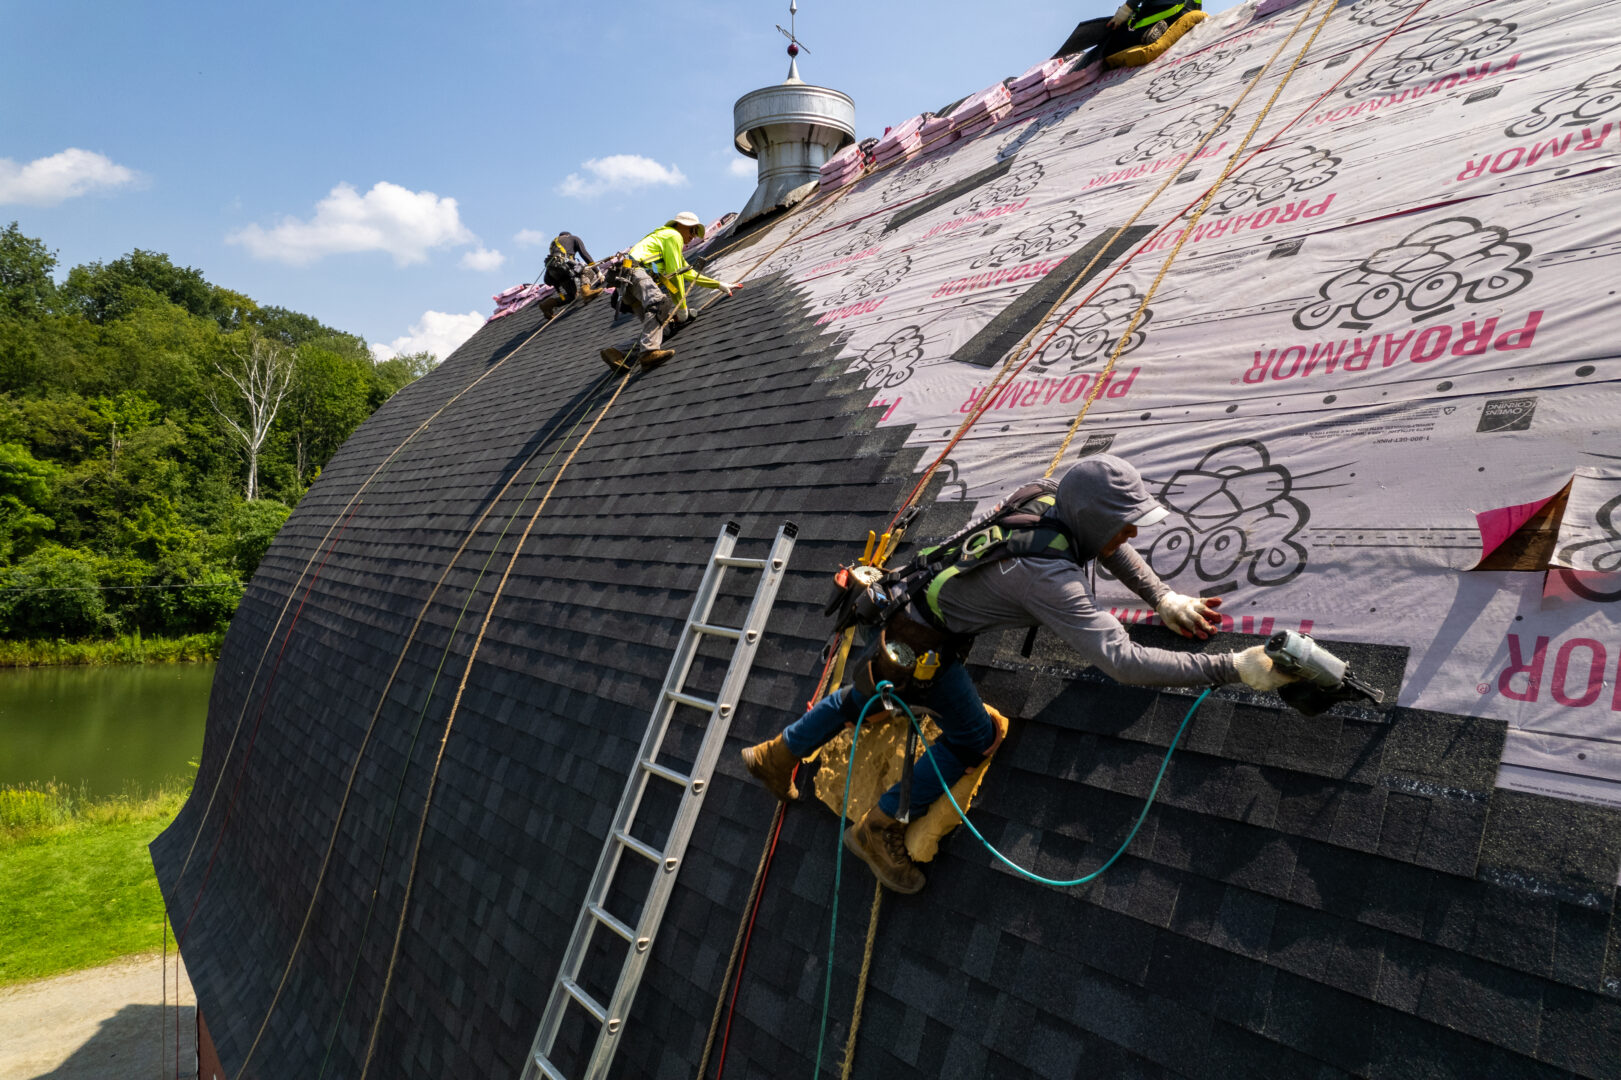 Roofers working safely on a roof using personal fall arrest systems (PFAS)